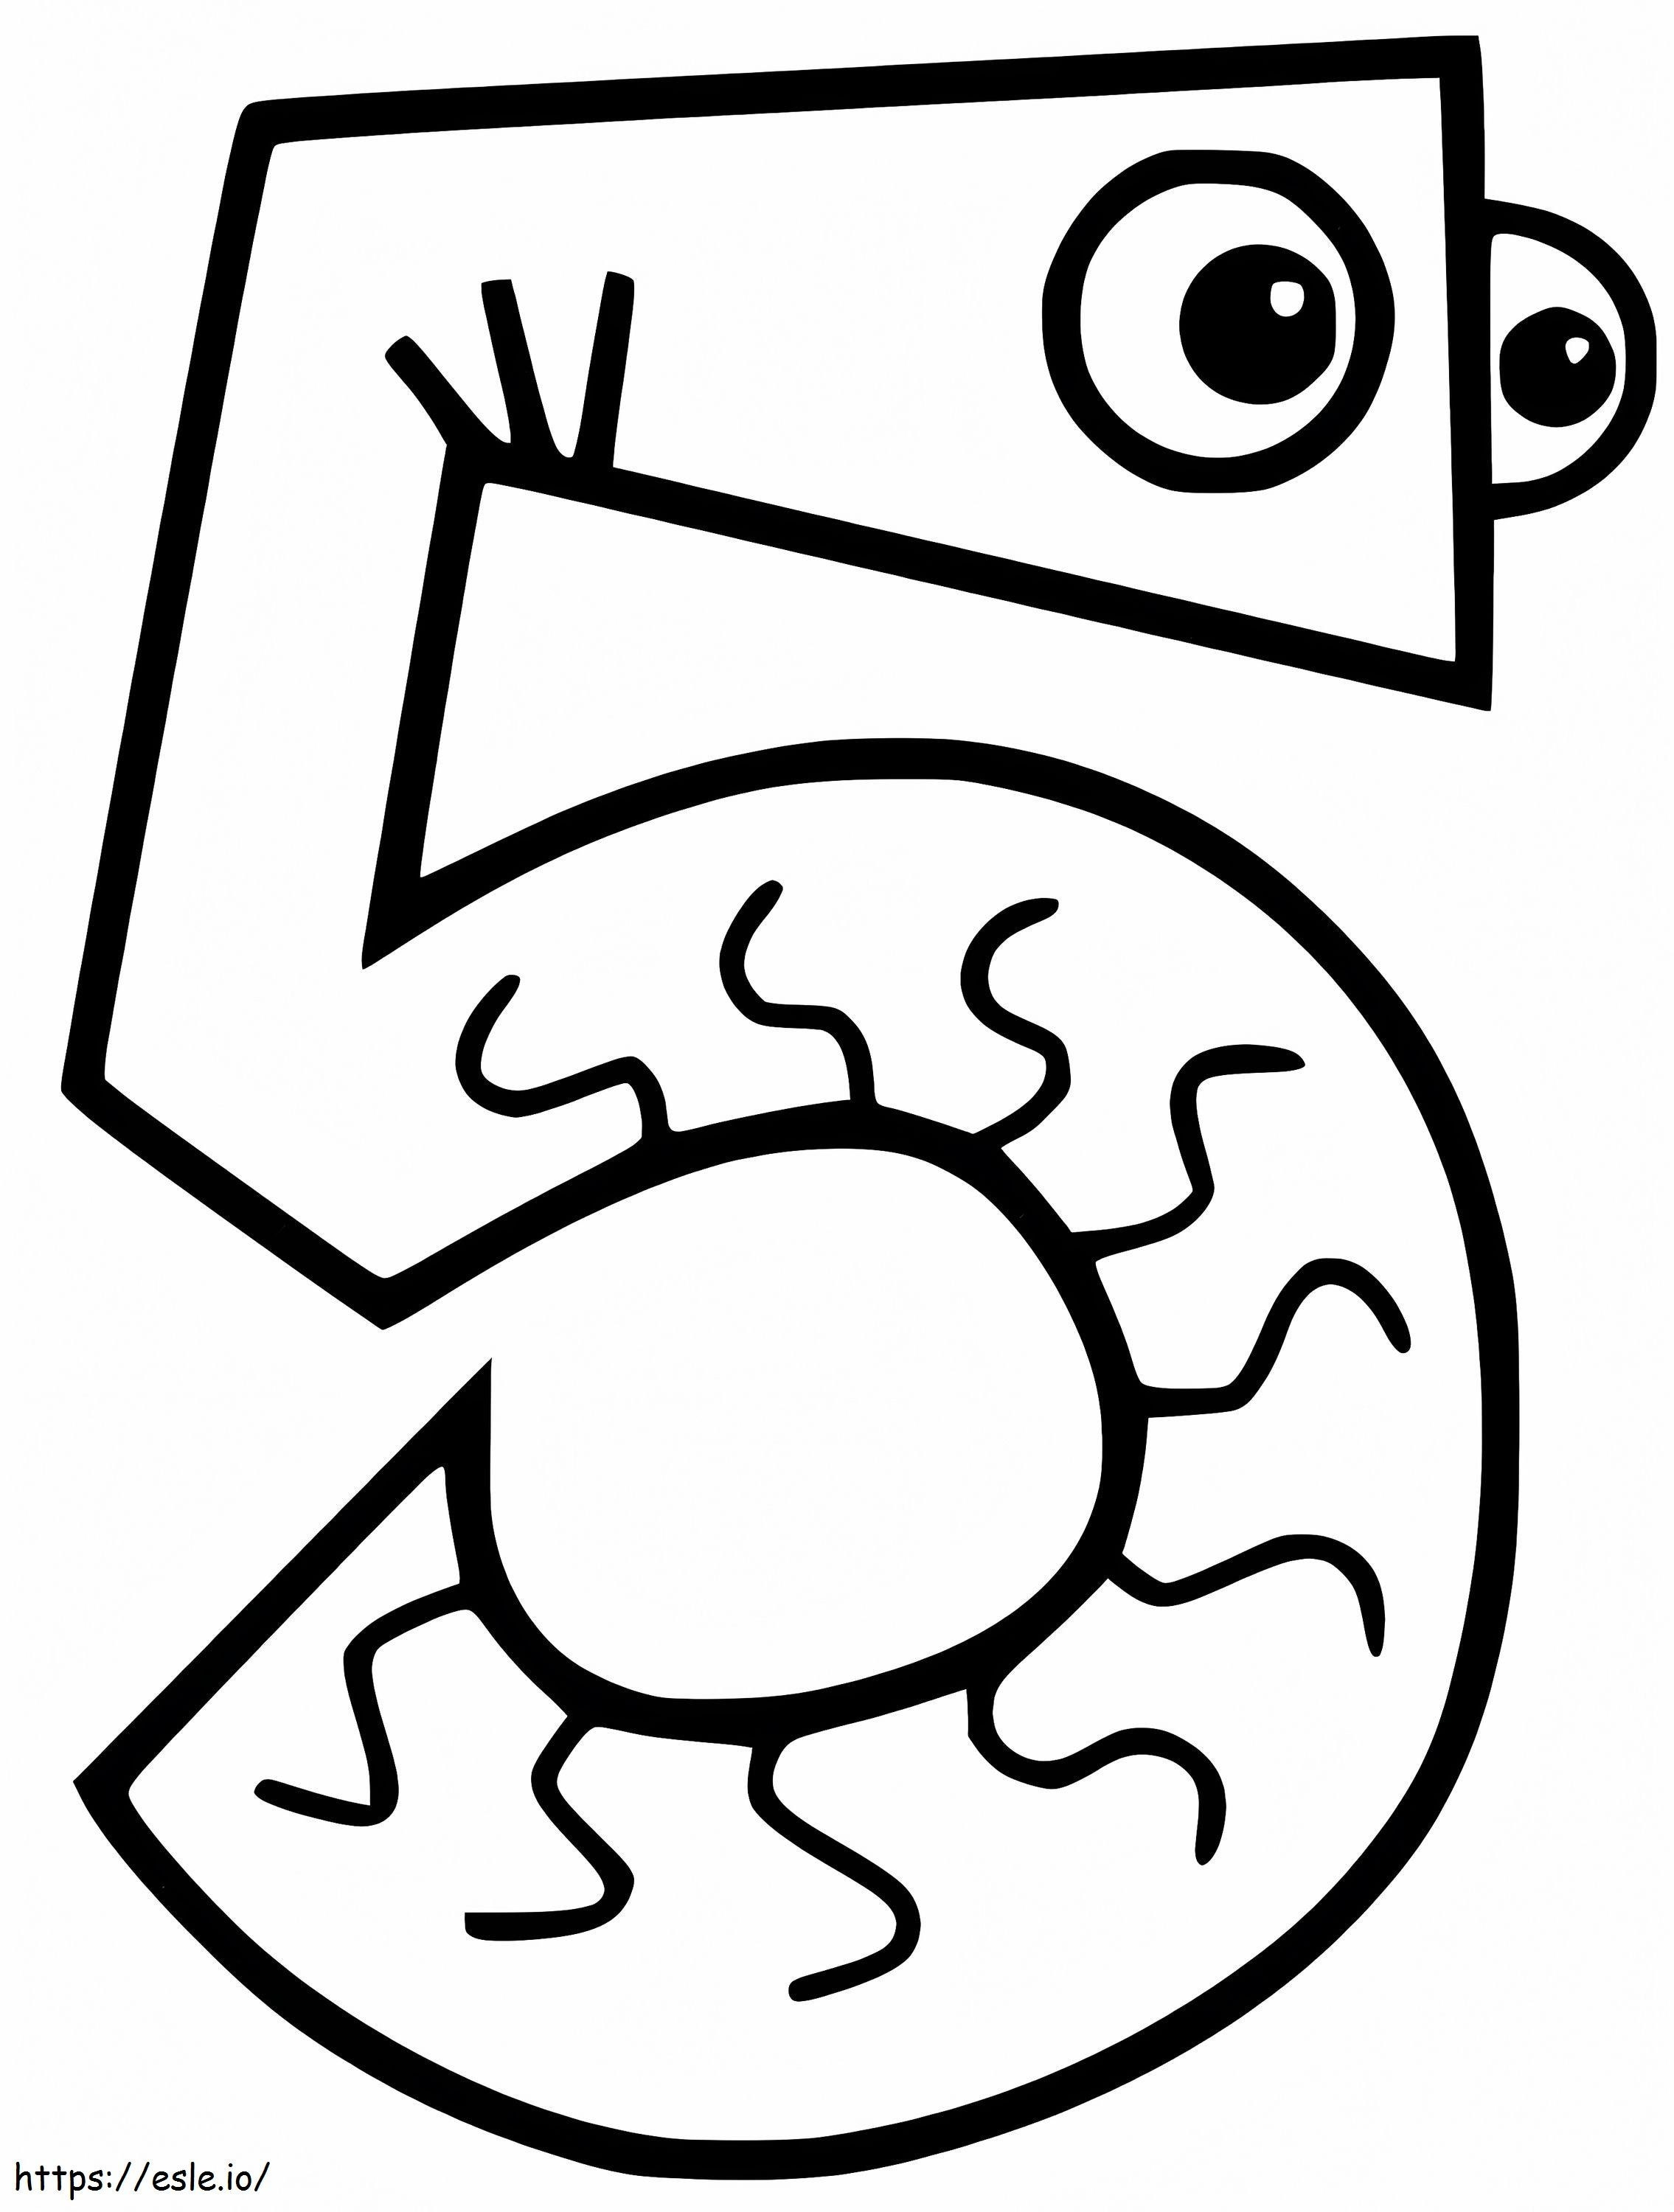 Odd Number 5 coloring page